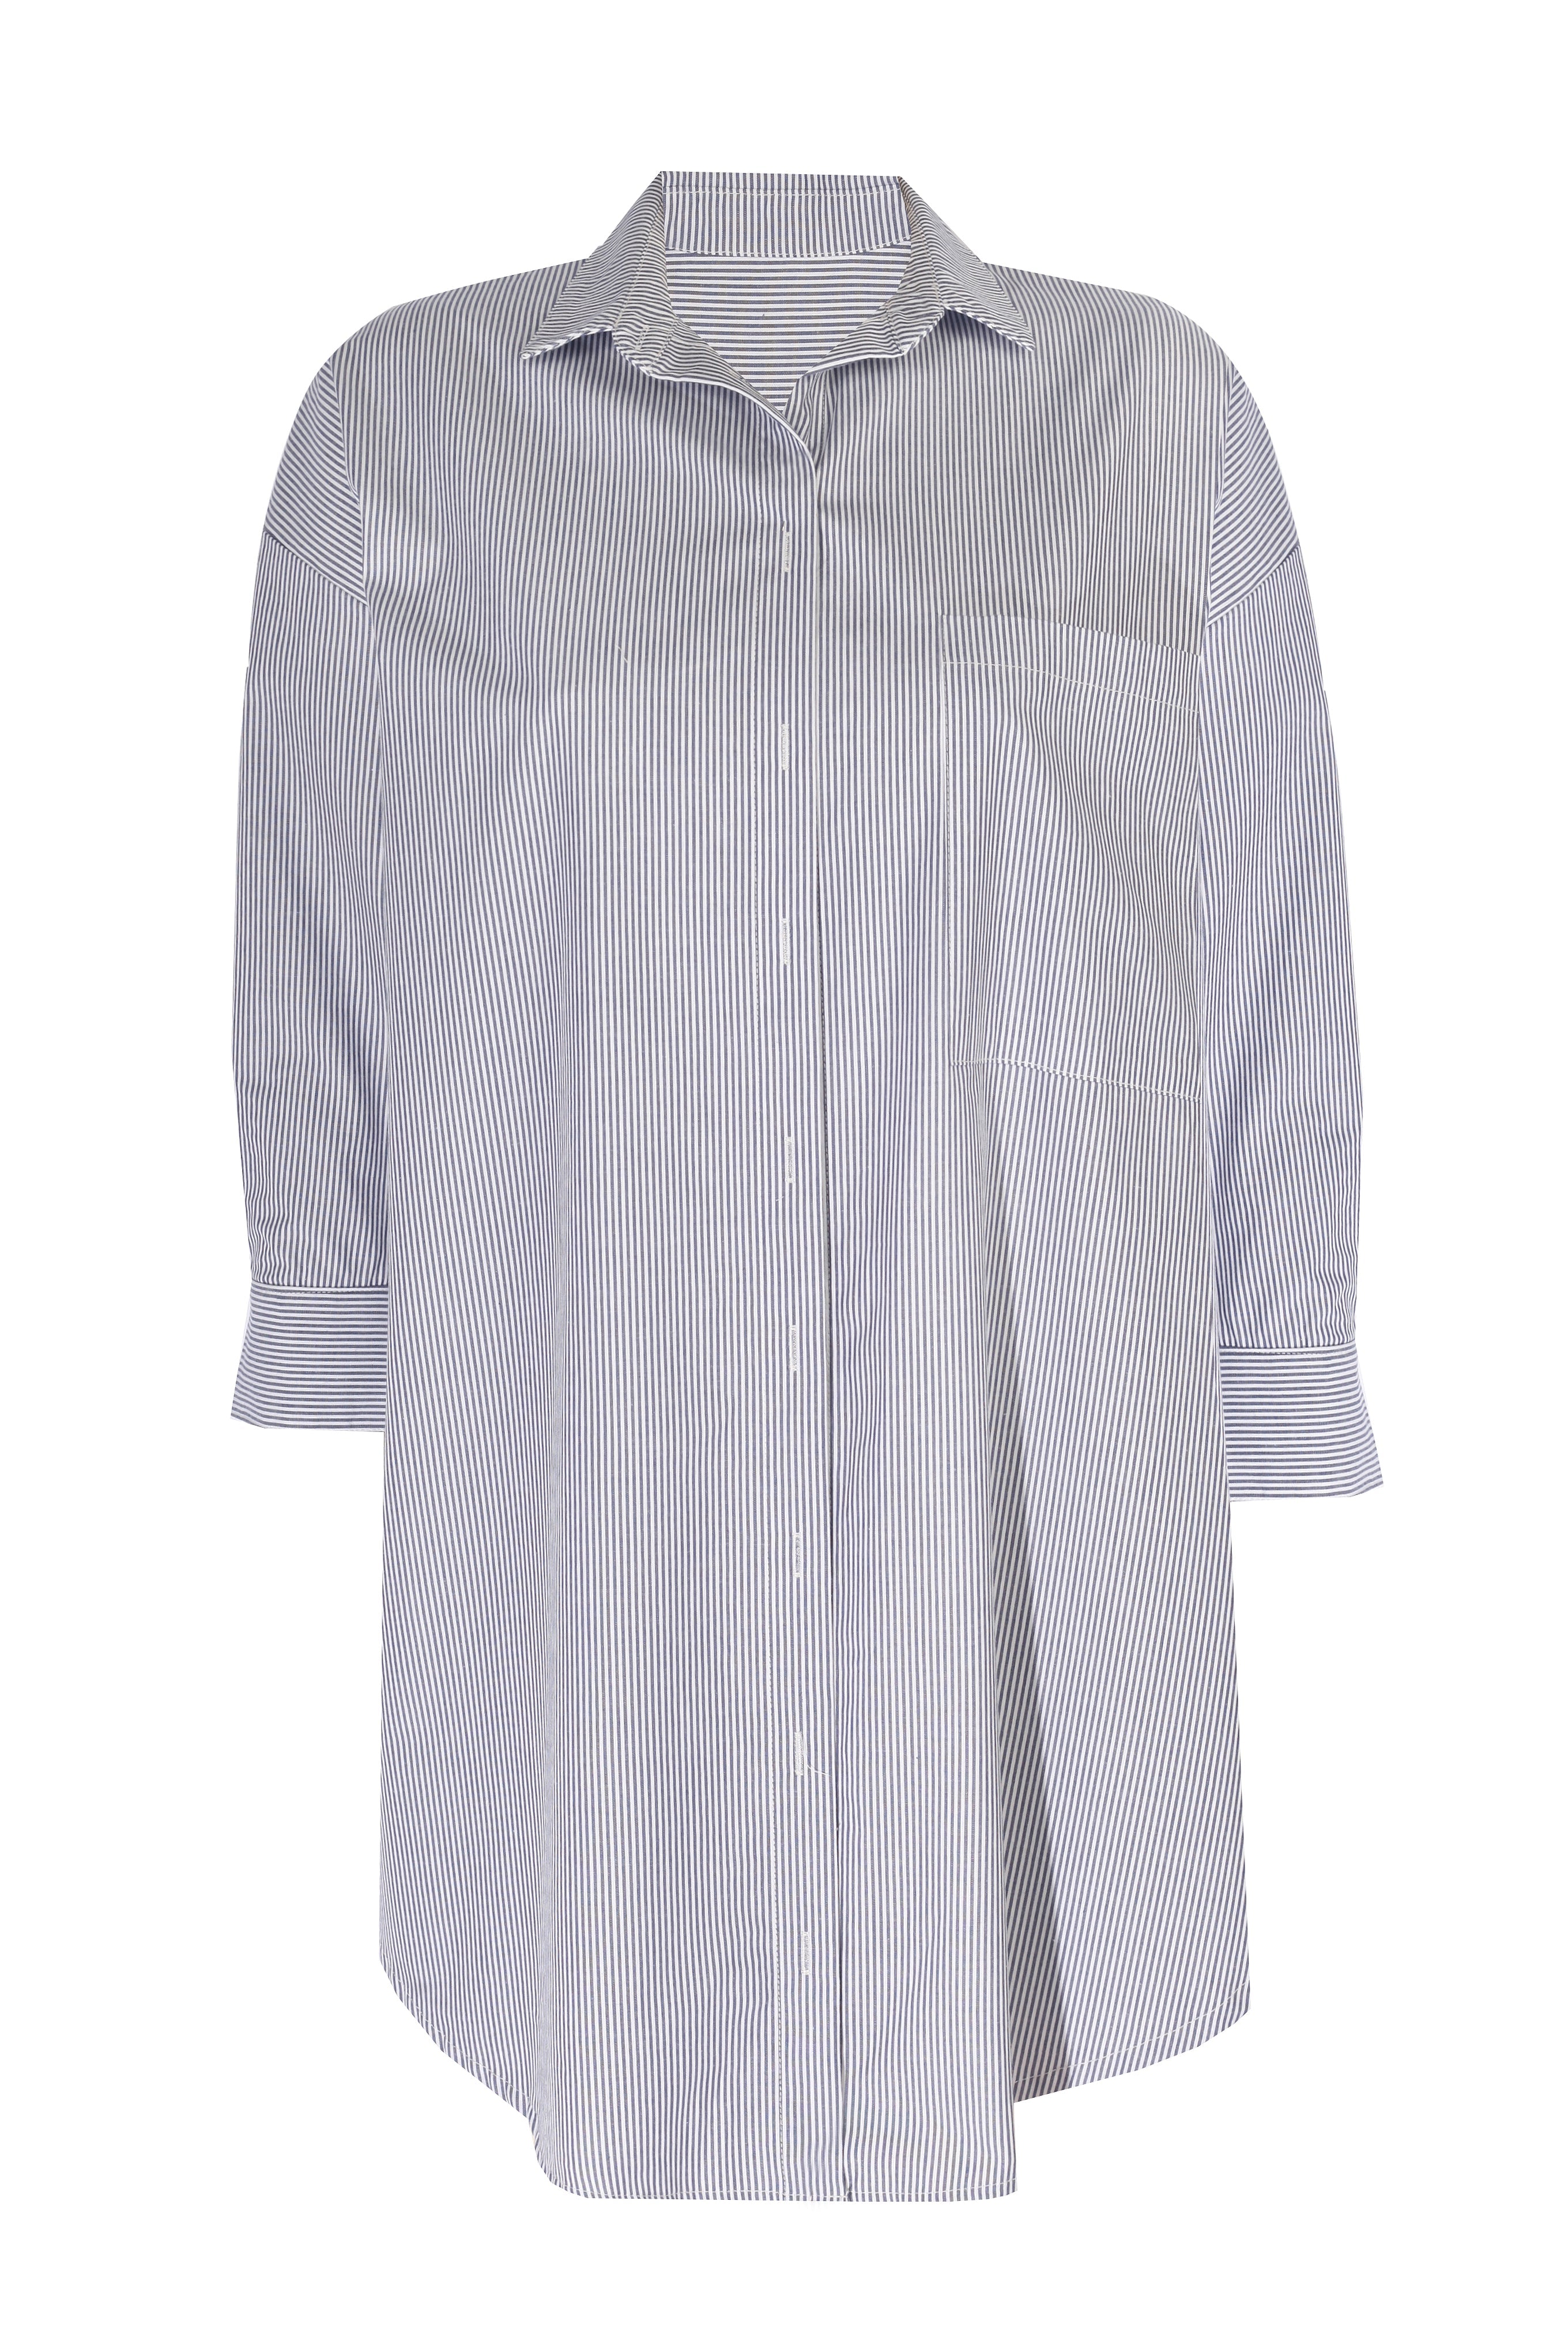 Yorstruly Women's Oversize Overshirt - Blue Striped In White